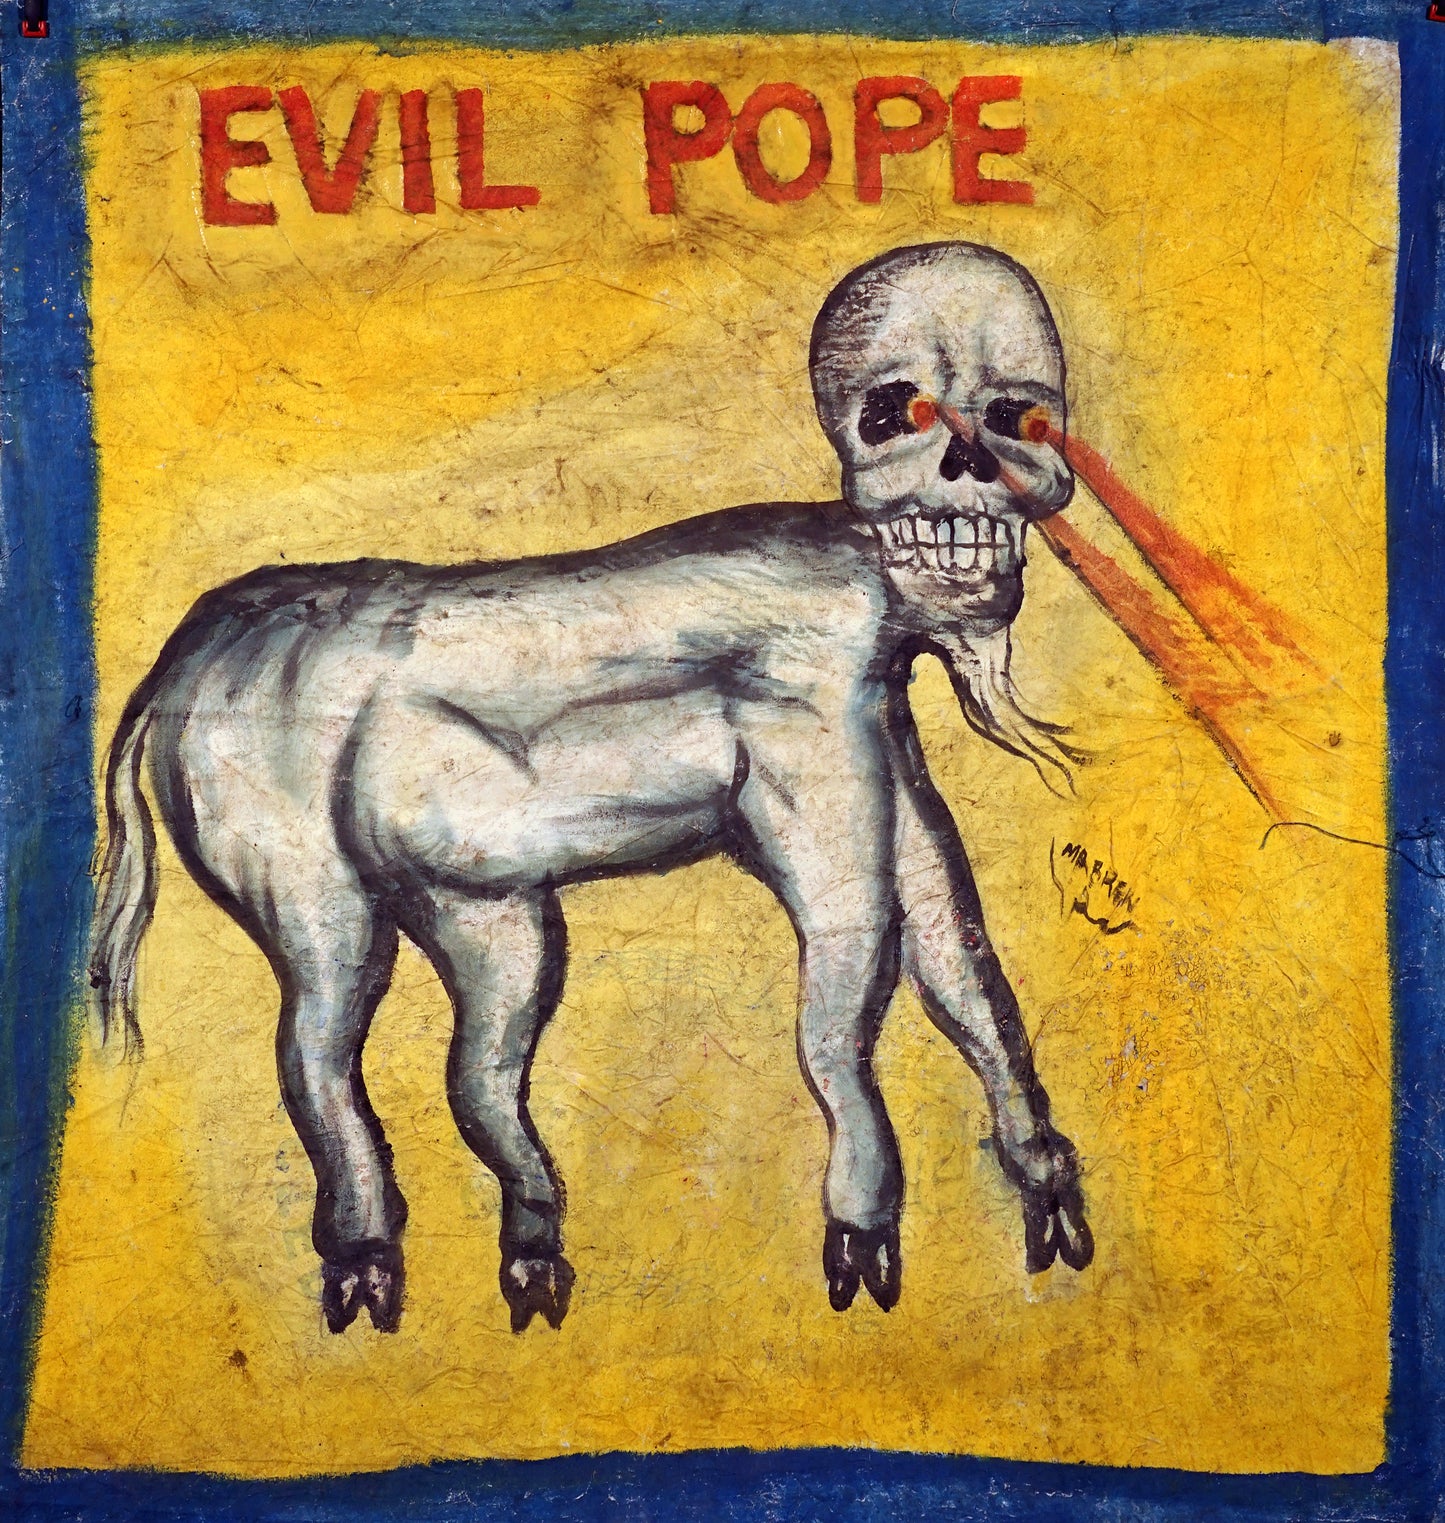 "Evil Pope" by Mr. Brew